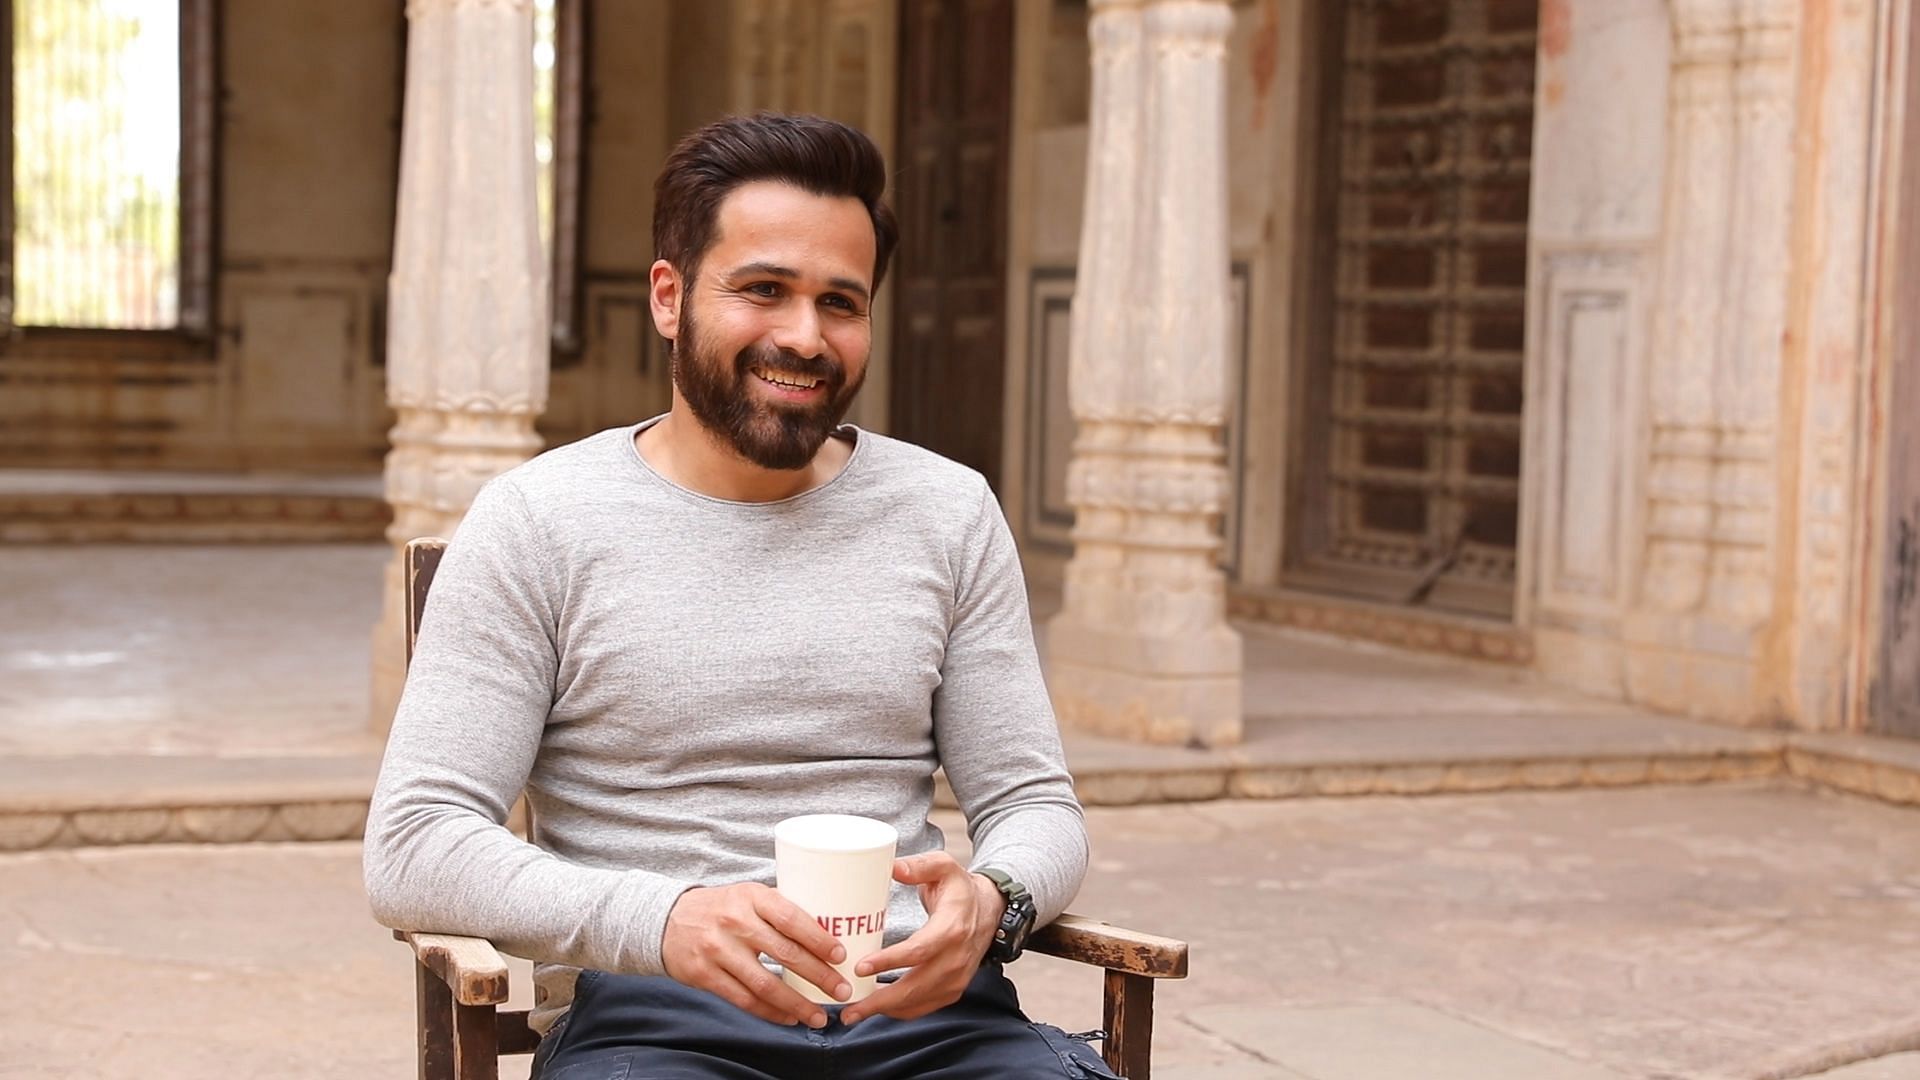 Emraan Hashmi gets candid on the sets of ‘Bard of Blood’.